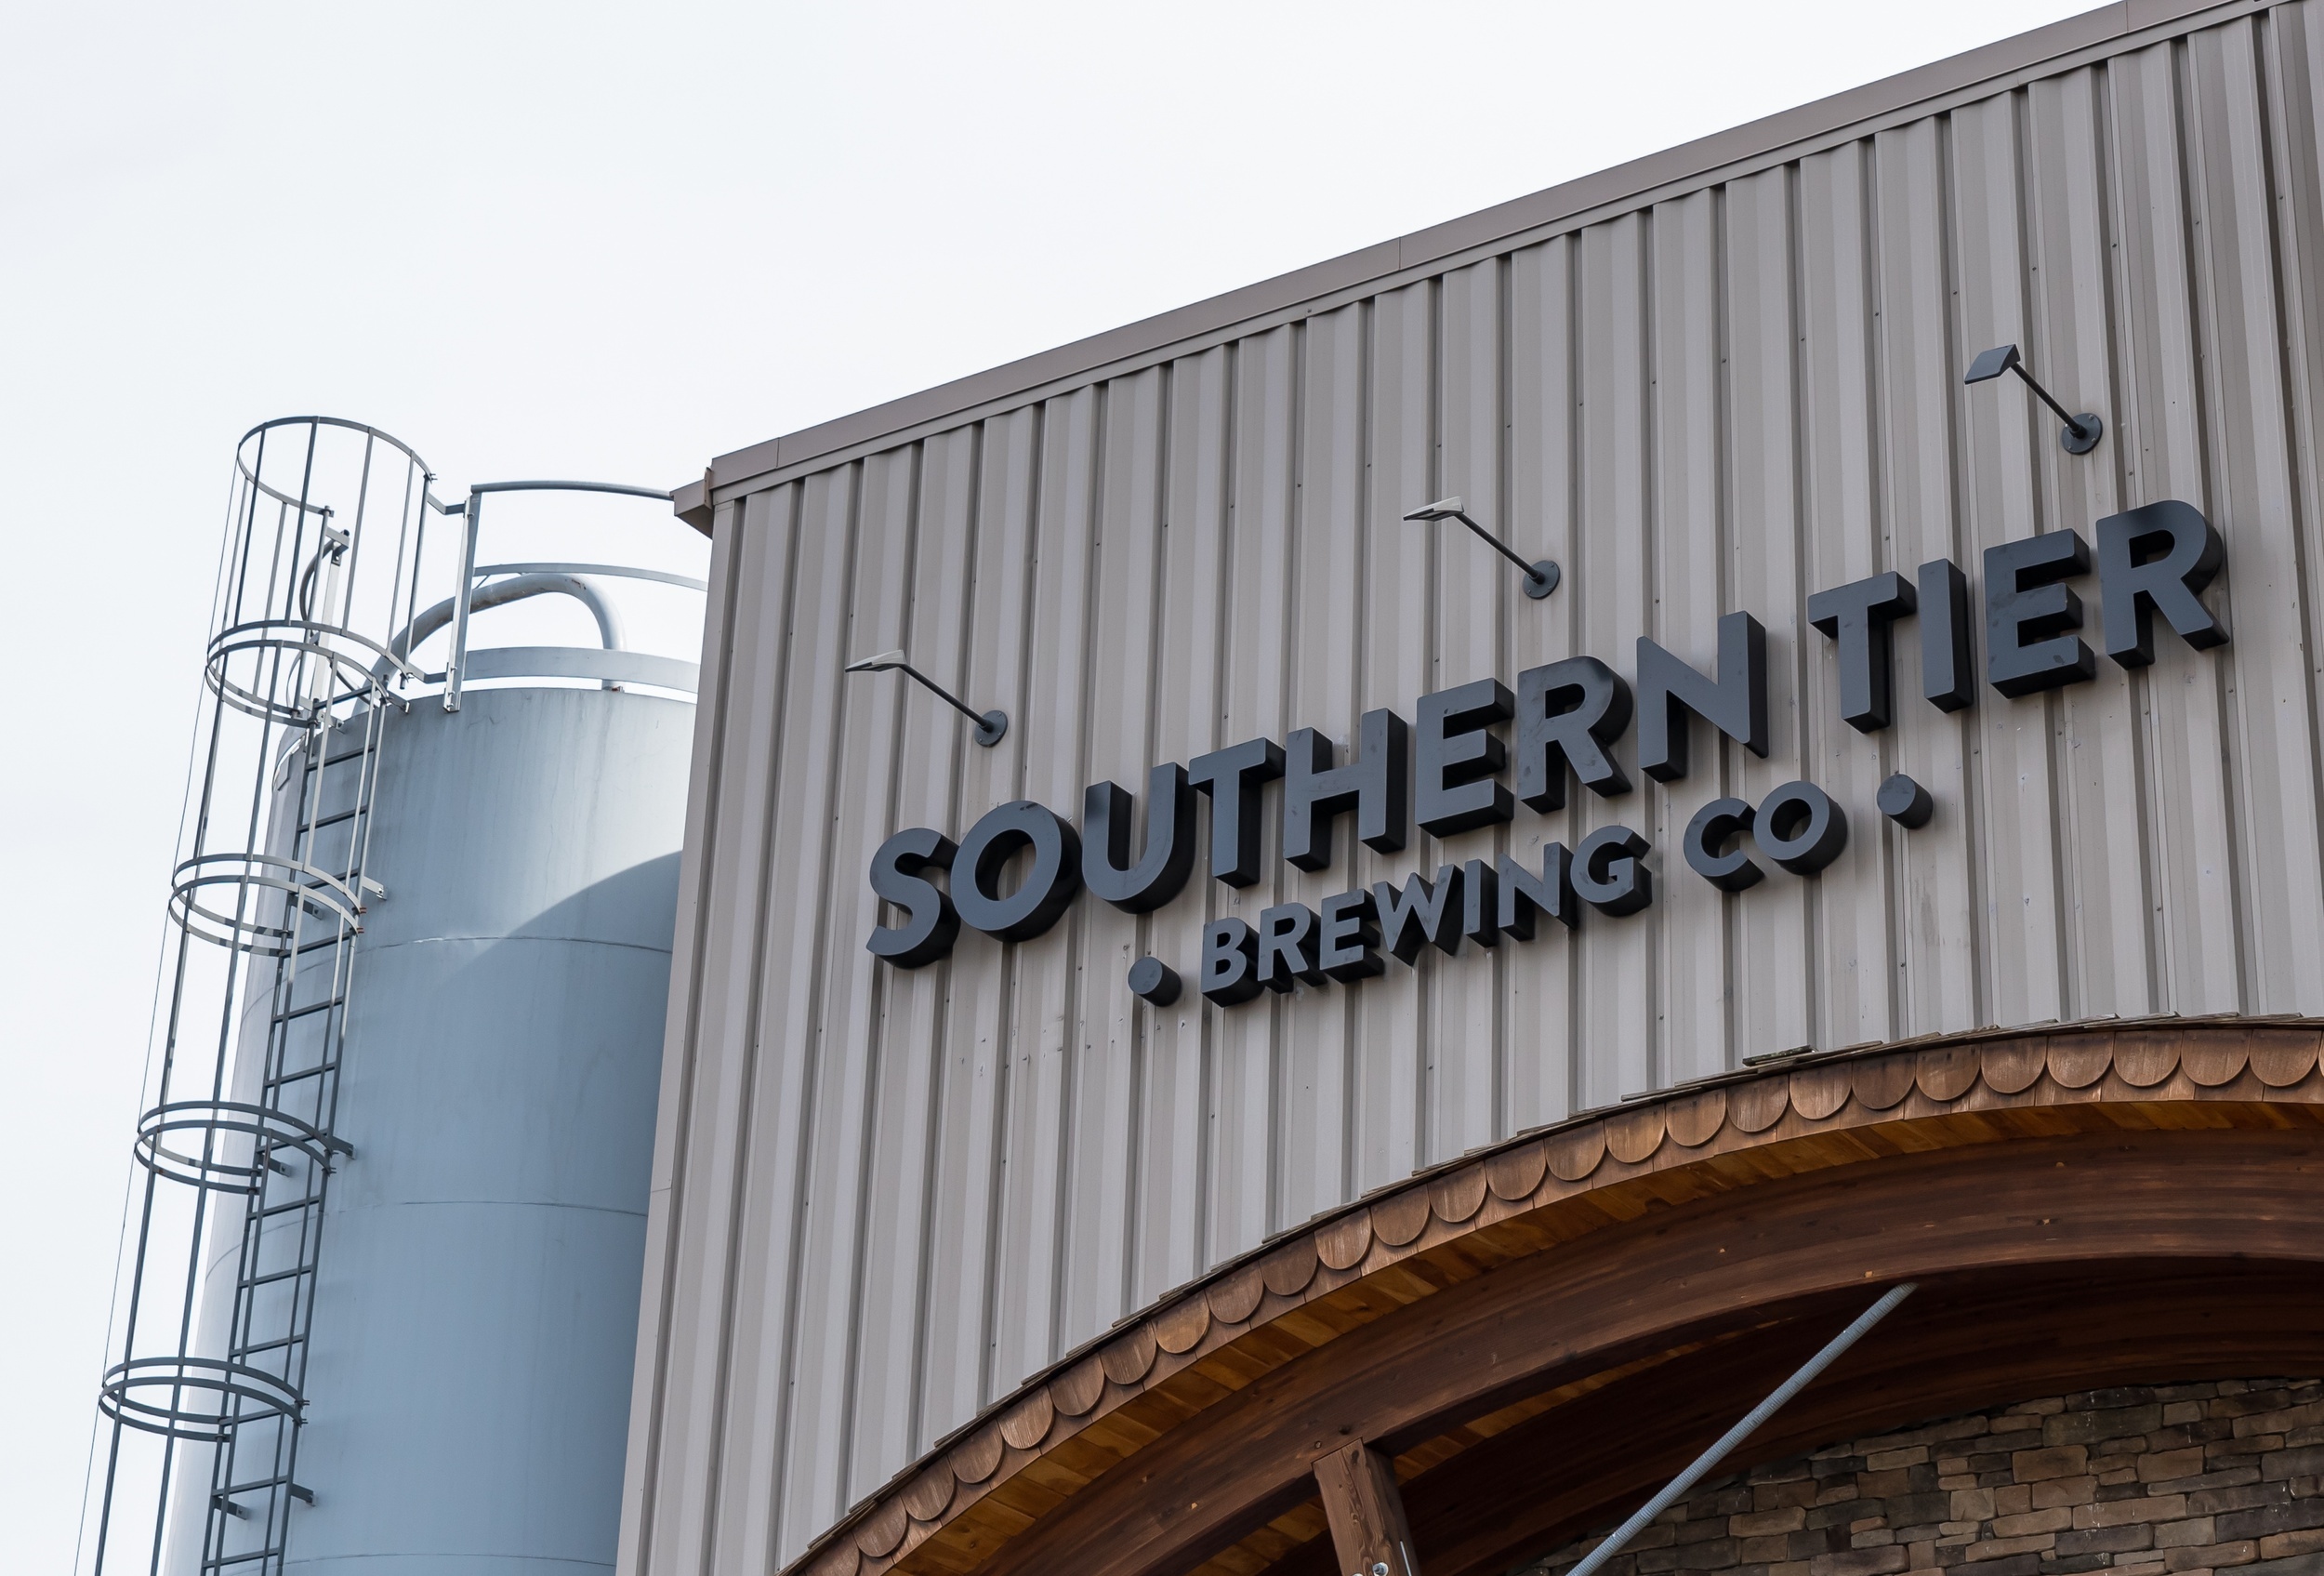 <p>Southern Tier has become a national brand as its reach extends to 30-plus states. They were born in Lakewood, New York in the early 2000s and have since expanded to five locations across four states. If you're not strictly a beer drinker, this place checks off another box as they produce their own distilling line. The parent company, Craft Revolution LLC, has three other brands in its portfolio: Victory Brewing, Sixpoint Brewery, and Bold Rock Hard Cider. Most locations feature a collection of all these brands.  </p><p><a href='https://www.msn.com/en-us/community/channel/vid-cj9pqbr0vn9in2b6ddcd8sfgpfq6x6utp44fssrv6mc2gtybw0us'>Follow us on MSN to see more of our exclusive lifestyle content.</a></p>